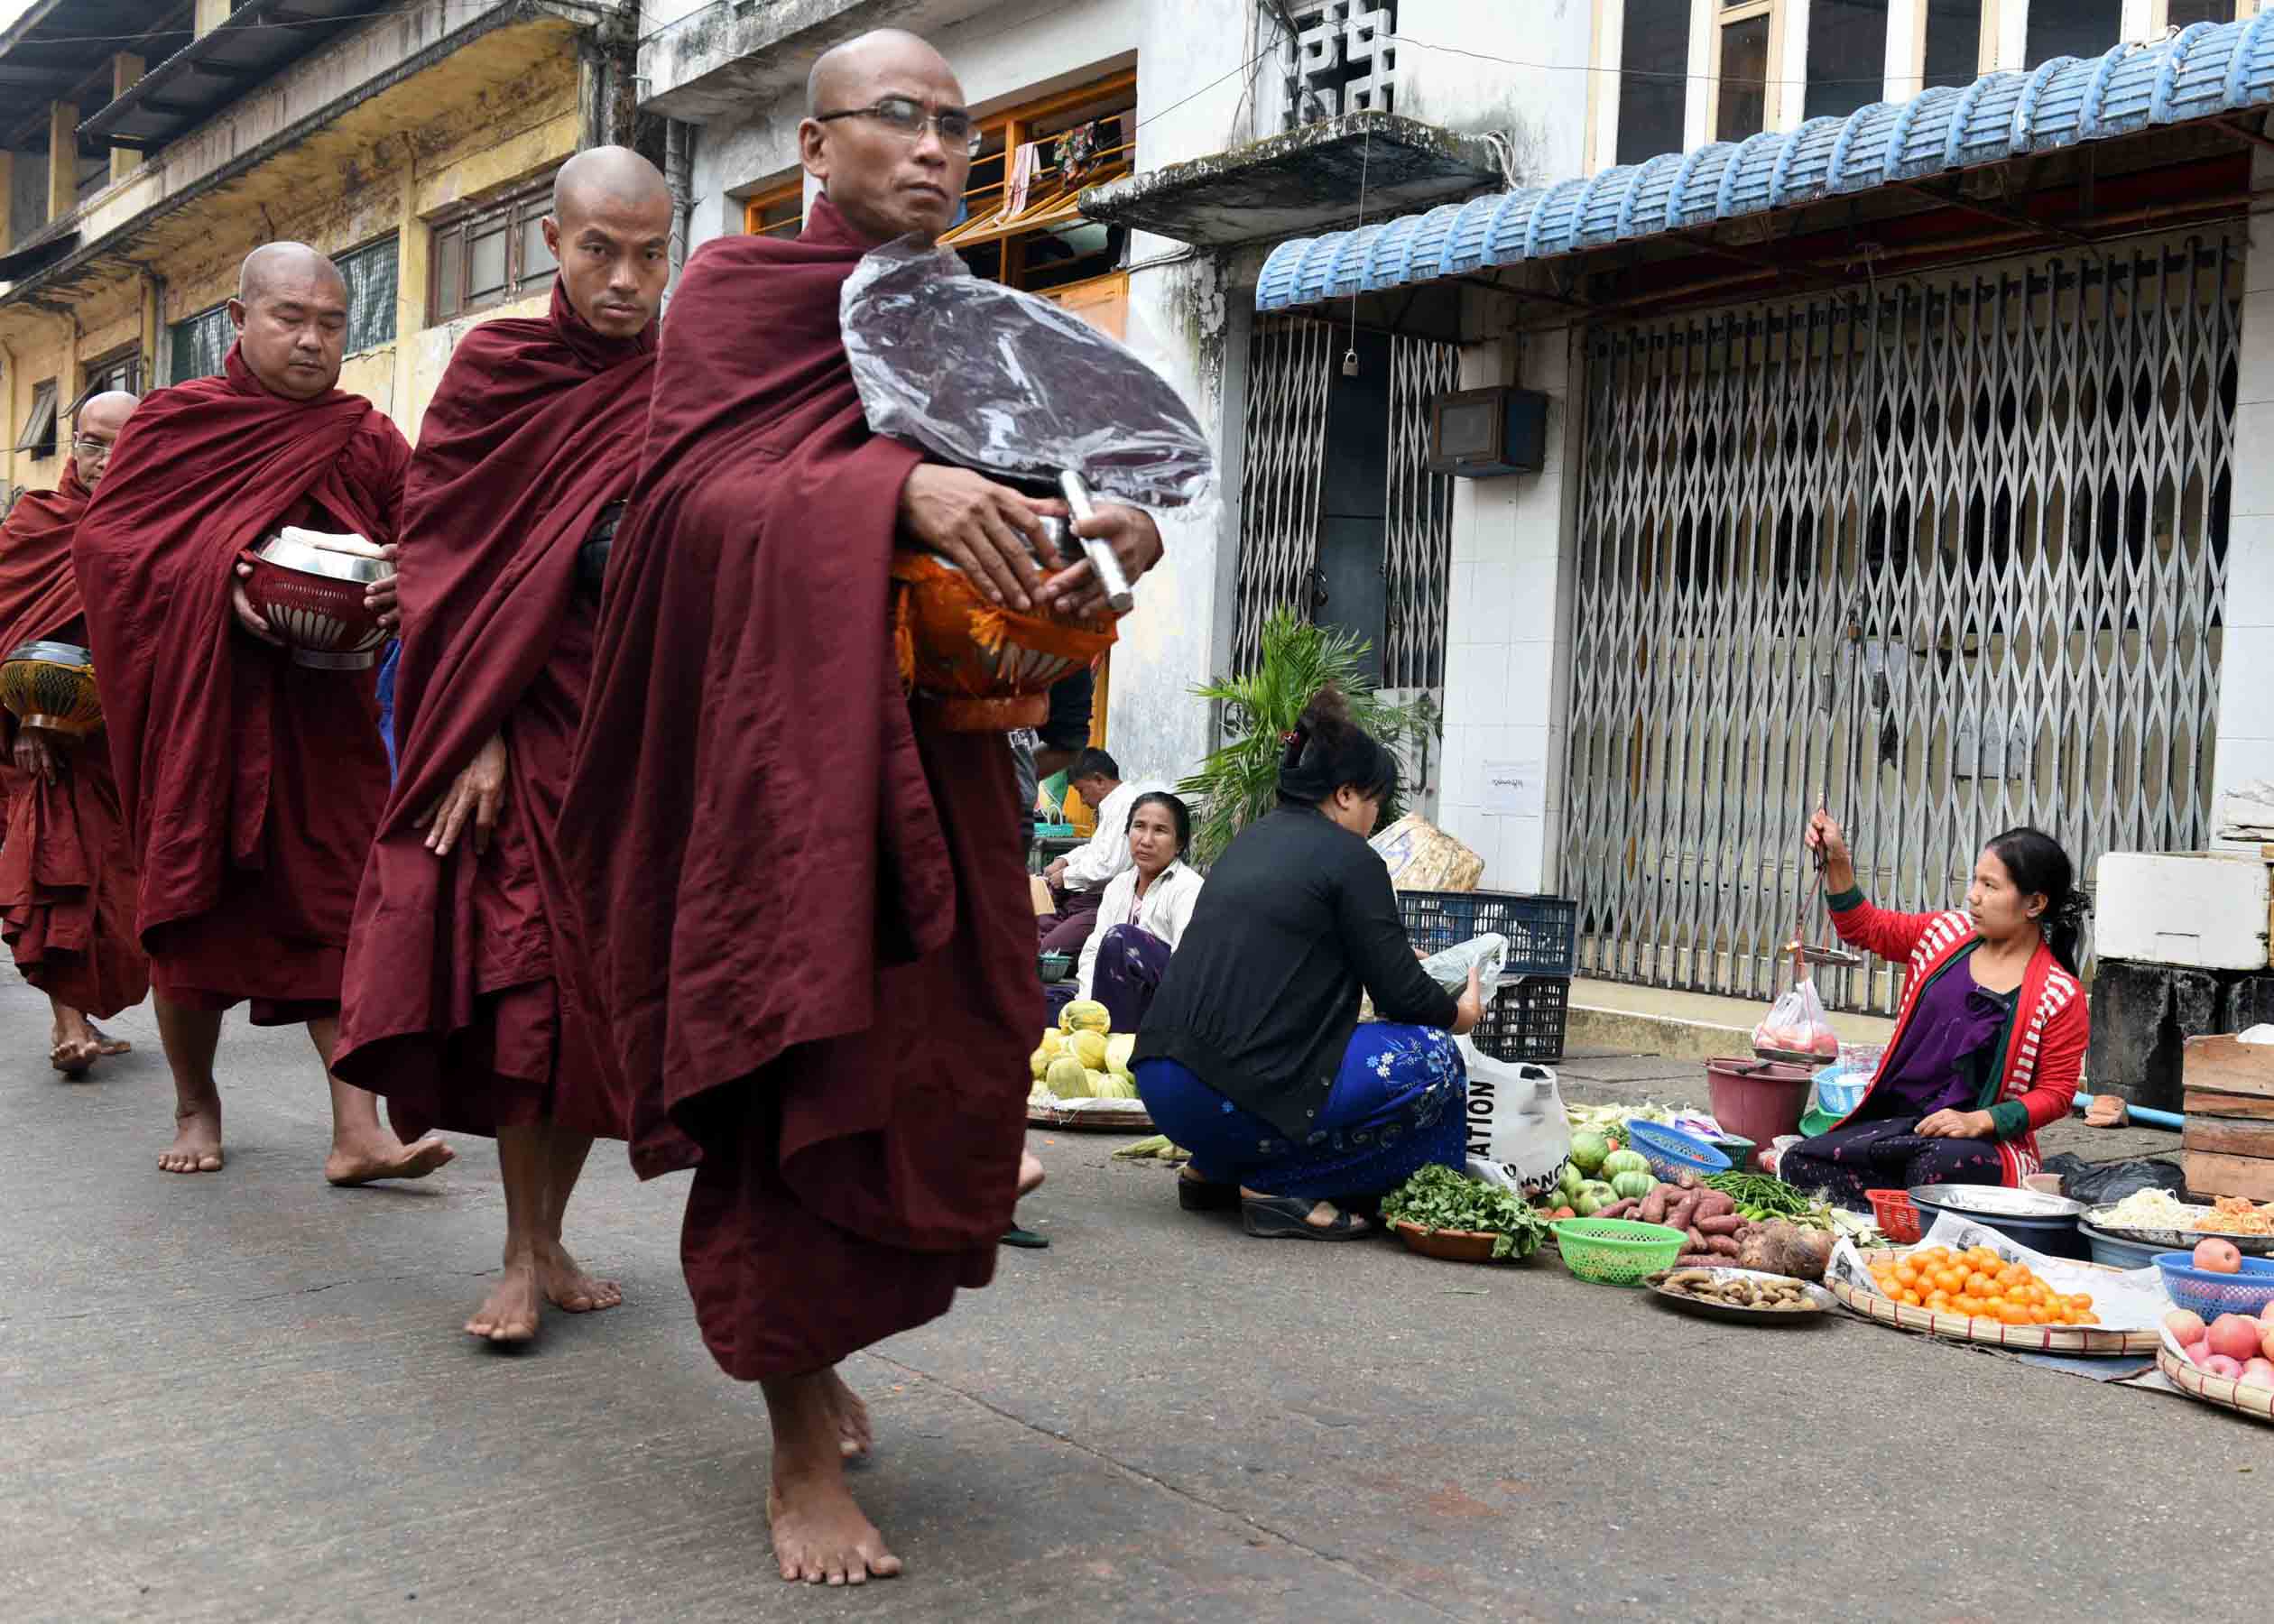 Buddhist monks in crimson robes walk through the streets of Yangon barefoot each morning collecting food, money, and other material offerings from people and bestowing brief prayers in exchange. (Photo: Naomi Hellmann)